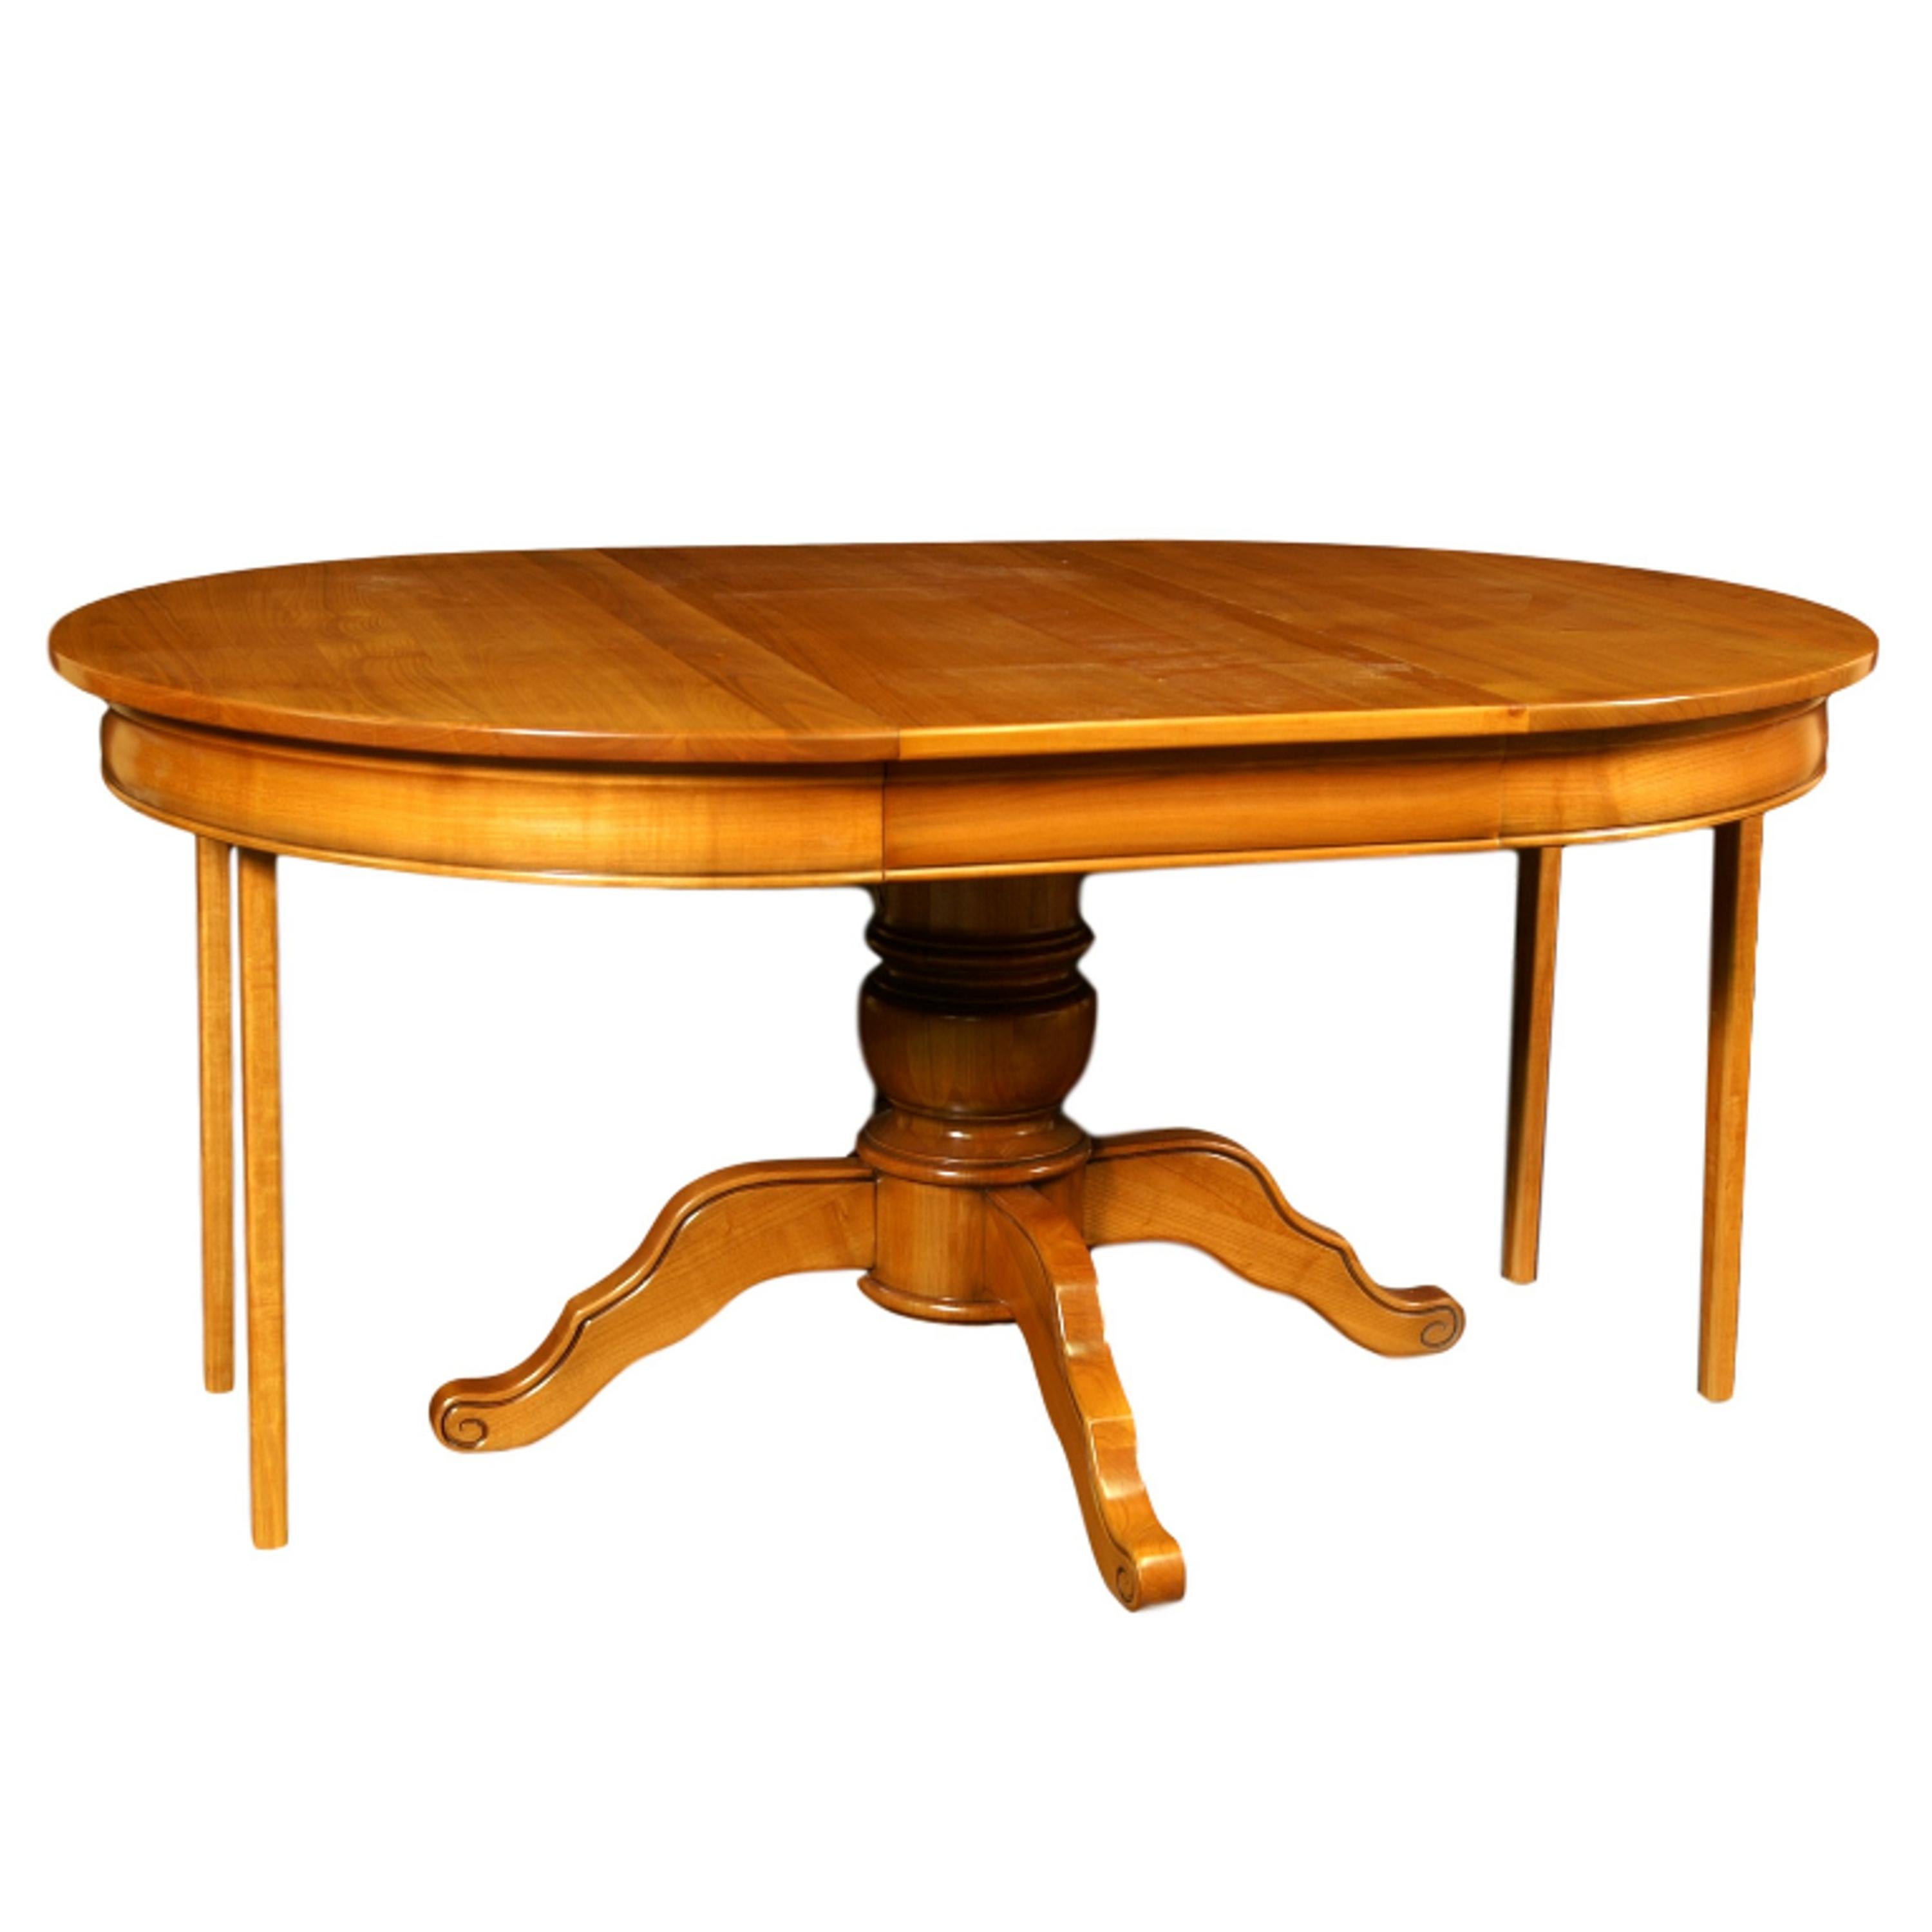 This dining round table is made of French solid Cherry and is typical of the Louis-Philippe period, mid-19th century with its hand-turned central foot.

2 Service extensions of 50 cm / 19.7'' each are provided. The first extension is made with a